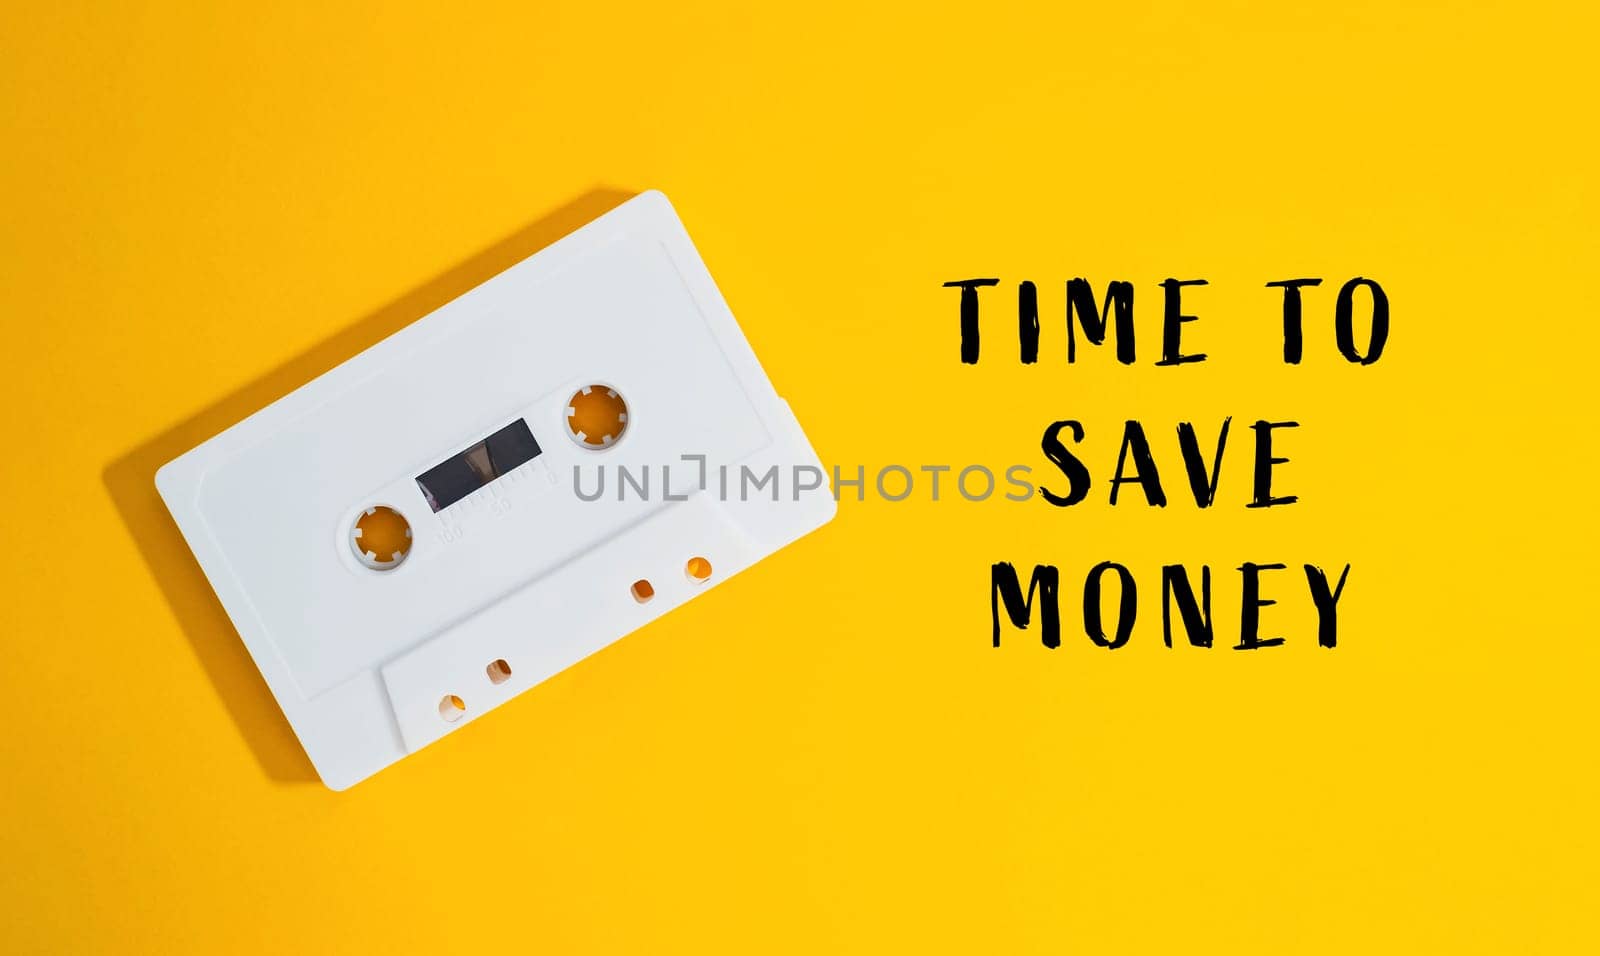 A white cassette tape is on a yellow background with the words Time to save money written below it